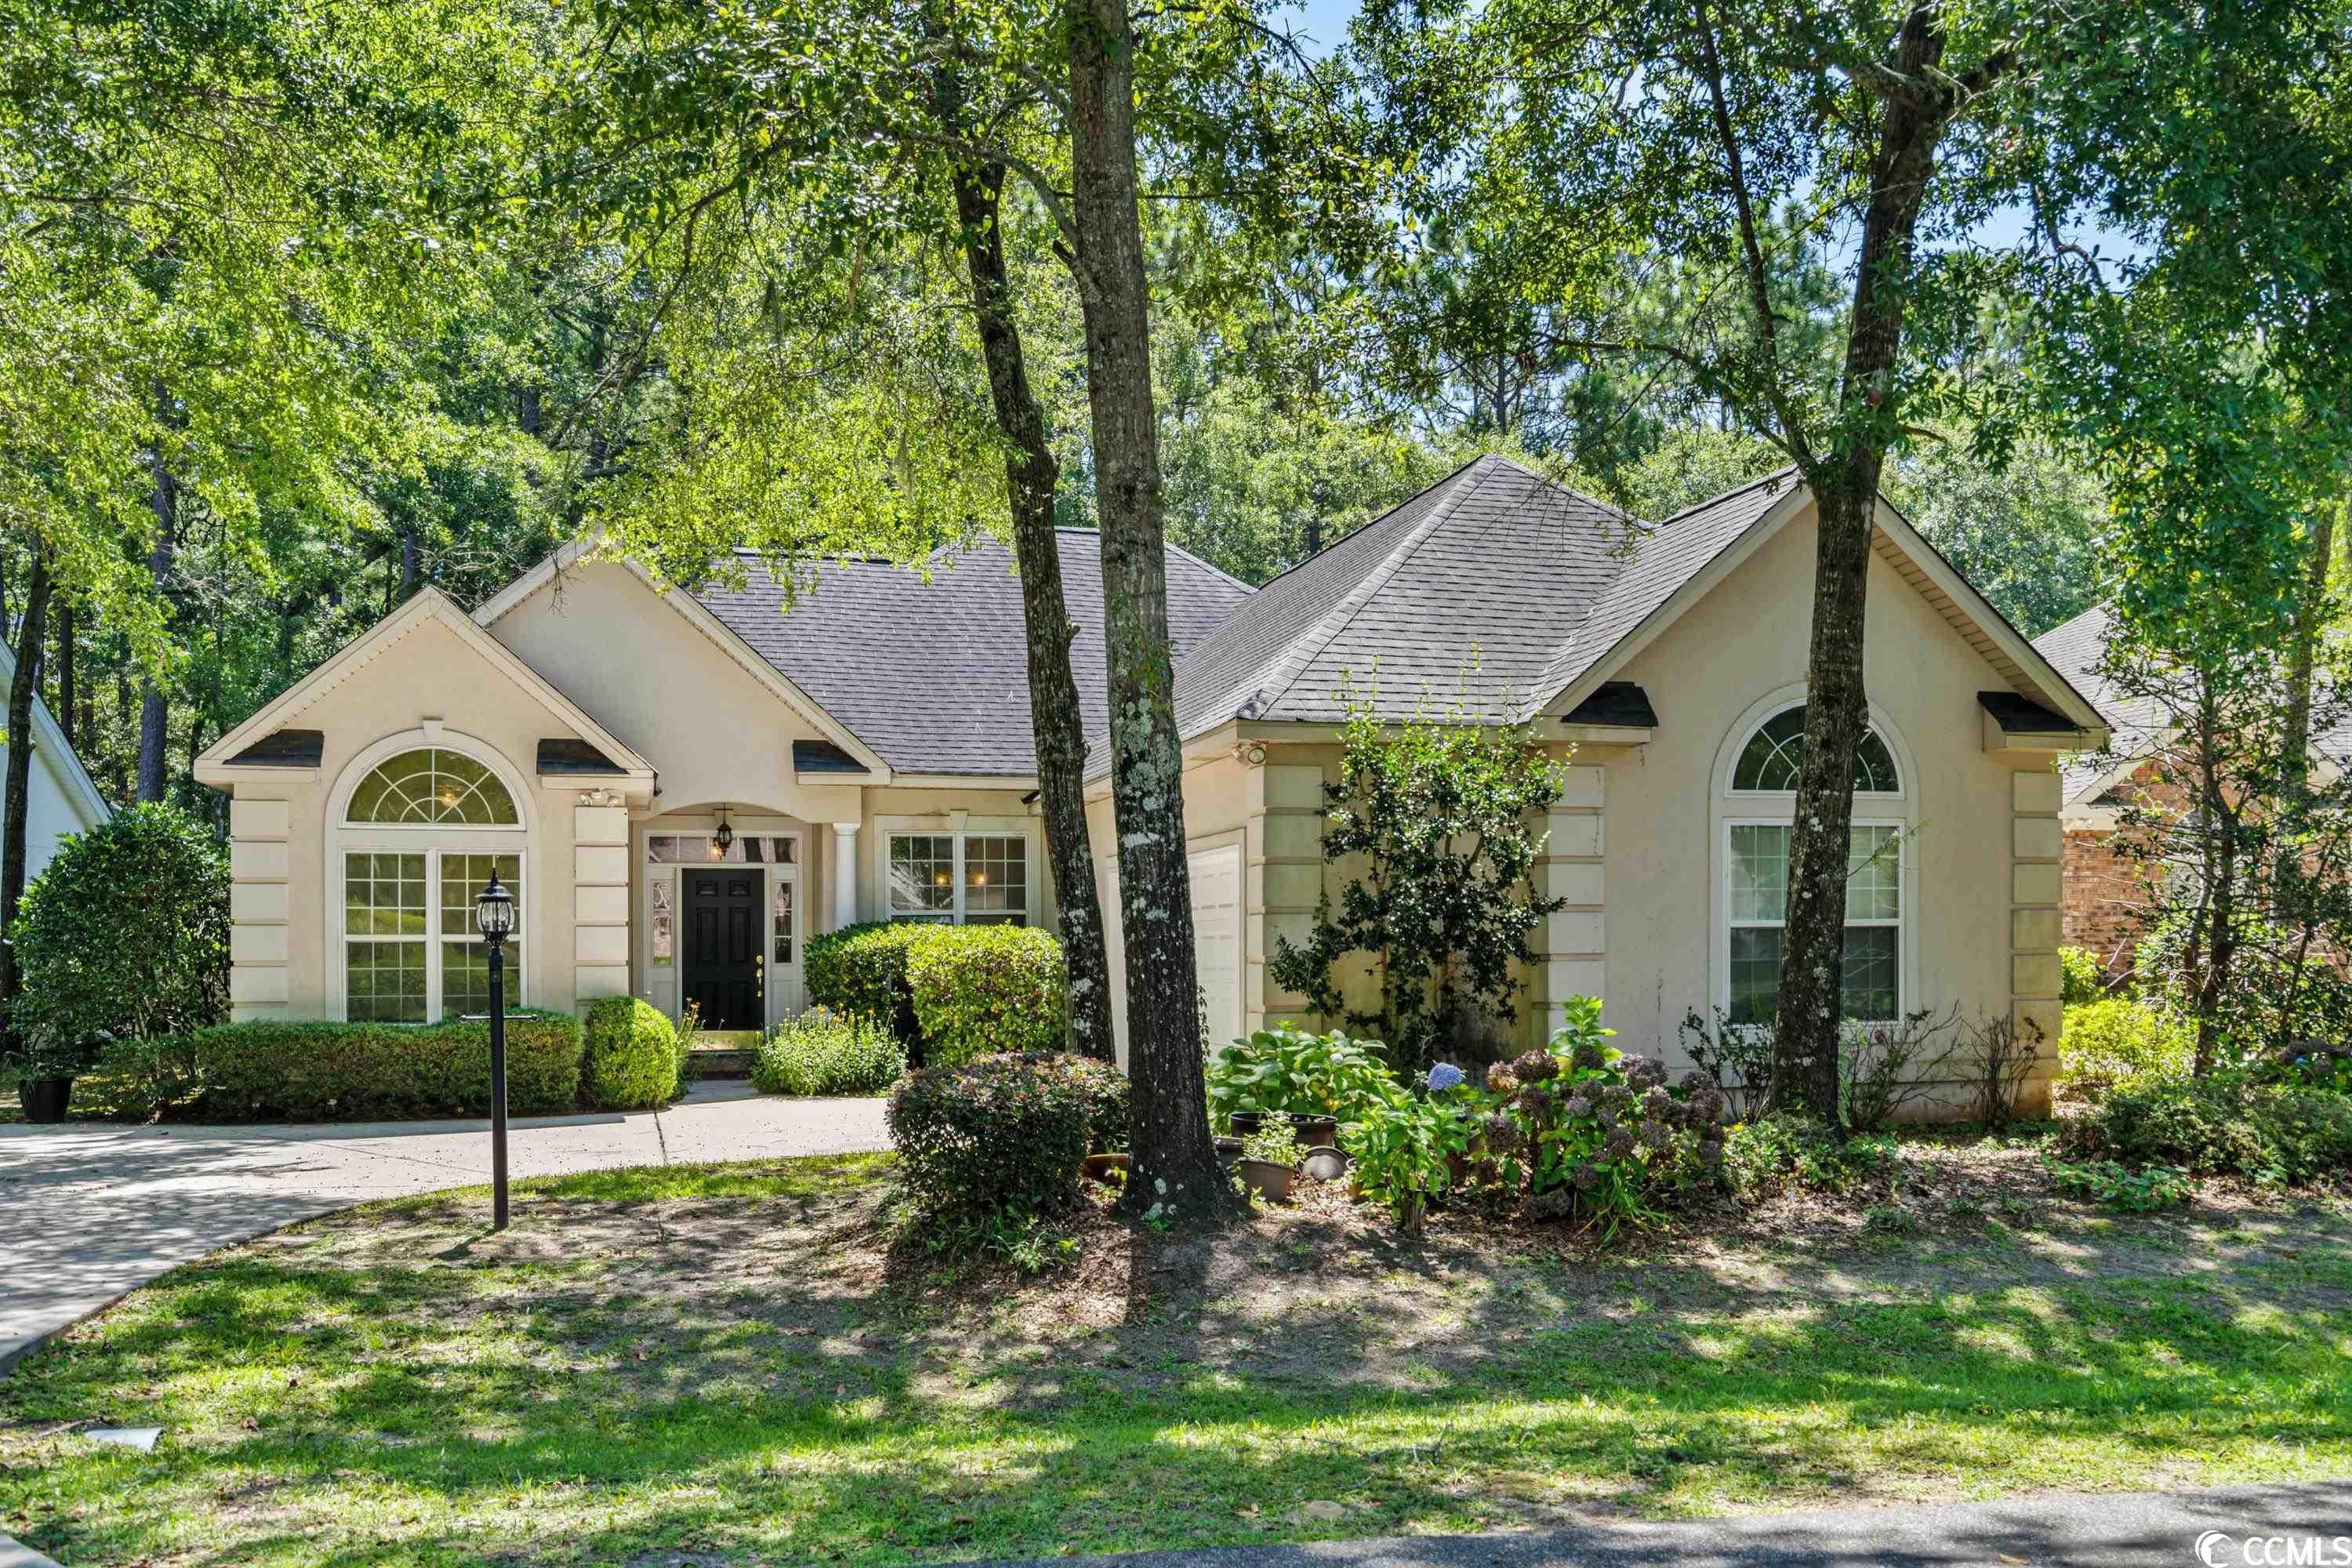 a wonderful opportunity is now available in the prestigious, gated heritage plantation community where spectacular views of the magnificent century old live oak trees begin at the entrance and continue to line the roadway that coils around the award-winning golf course en route to the spectacular intracoastal waterway on the waccamaw river. it is here that an impressive resident-owned marina is situated. tennis anyone - there are four har-tru clay courts, pickleball courts, community clubhouse with fitness center, outdoor pool and playground. the boat launch at the marina also provides access for kayaks as well as boats. heritage plantation is a golf community surrounded by a plethora of other golf courses and pawleys island beach and huntington beach state park are near, very near. restaurants, medical facilities, schools, entertainment brookgreen gardens, hobcaw barony and some much more await your visit. square footage is approximate and not guaranteed. buyer is responsible for verification.